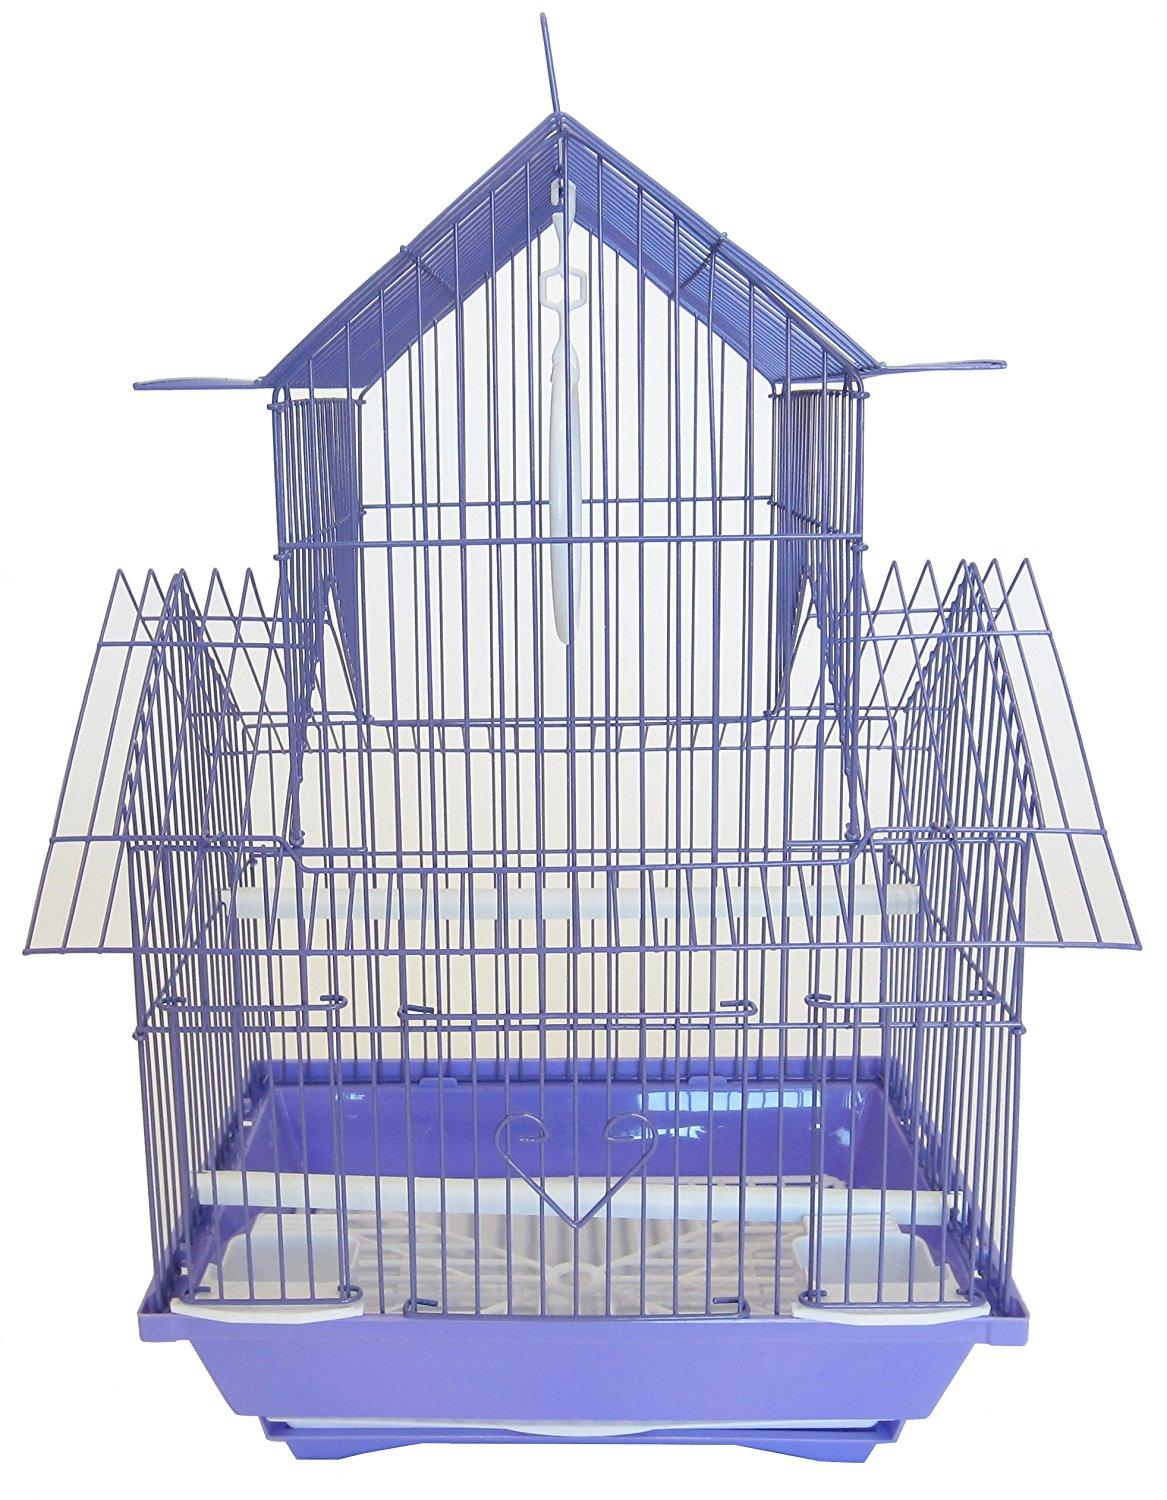 YML A1144PUR Pagoda Top Cage, Small